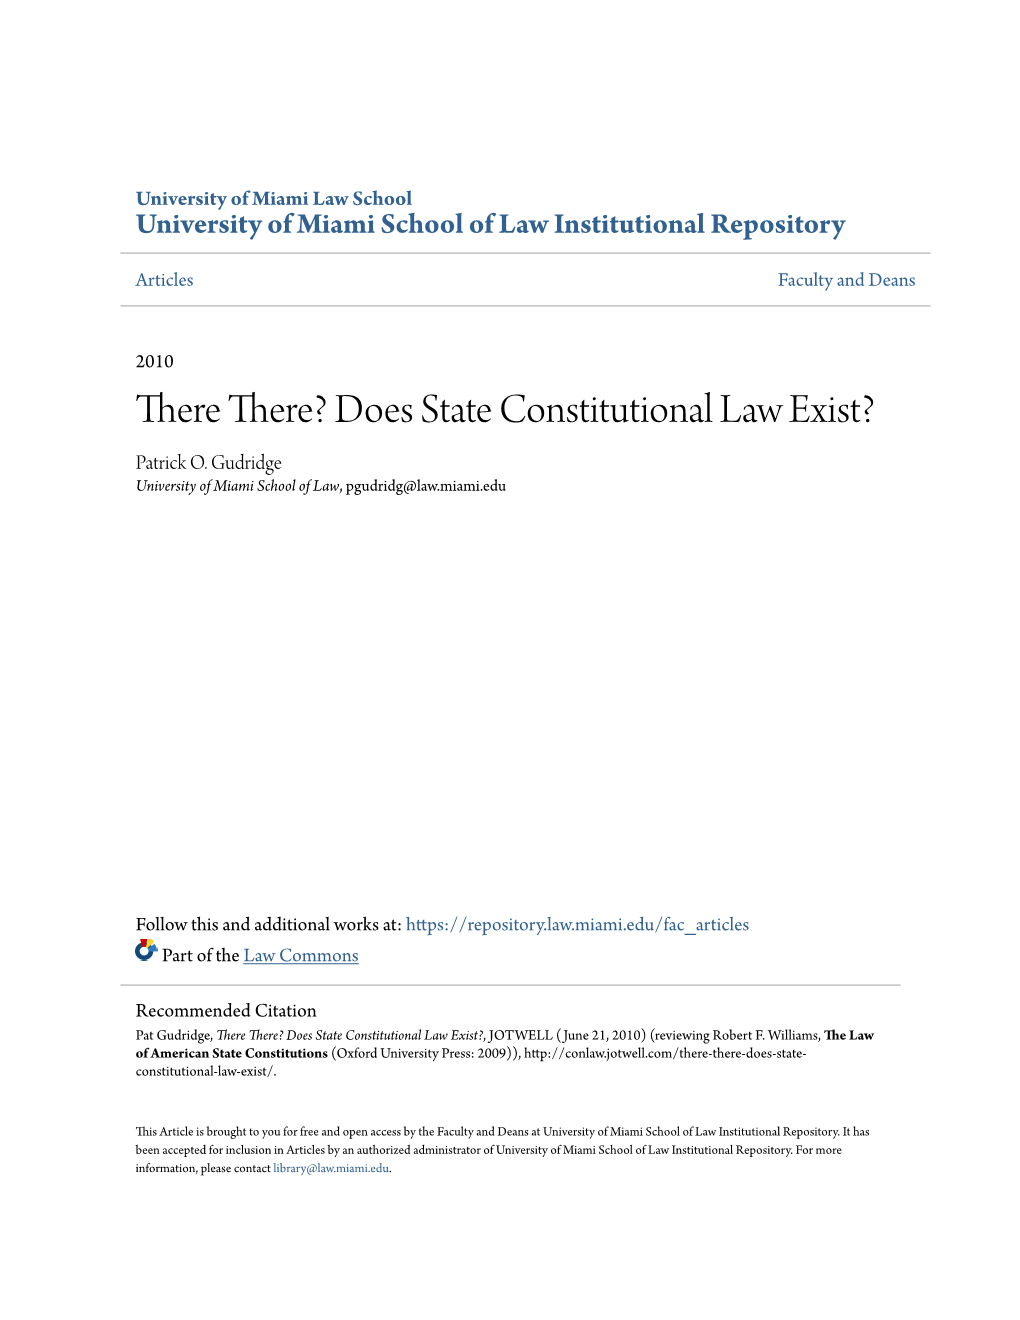 Does State Constitutional Law Exist? Patrick O